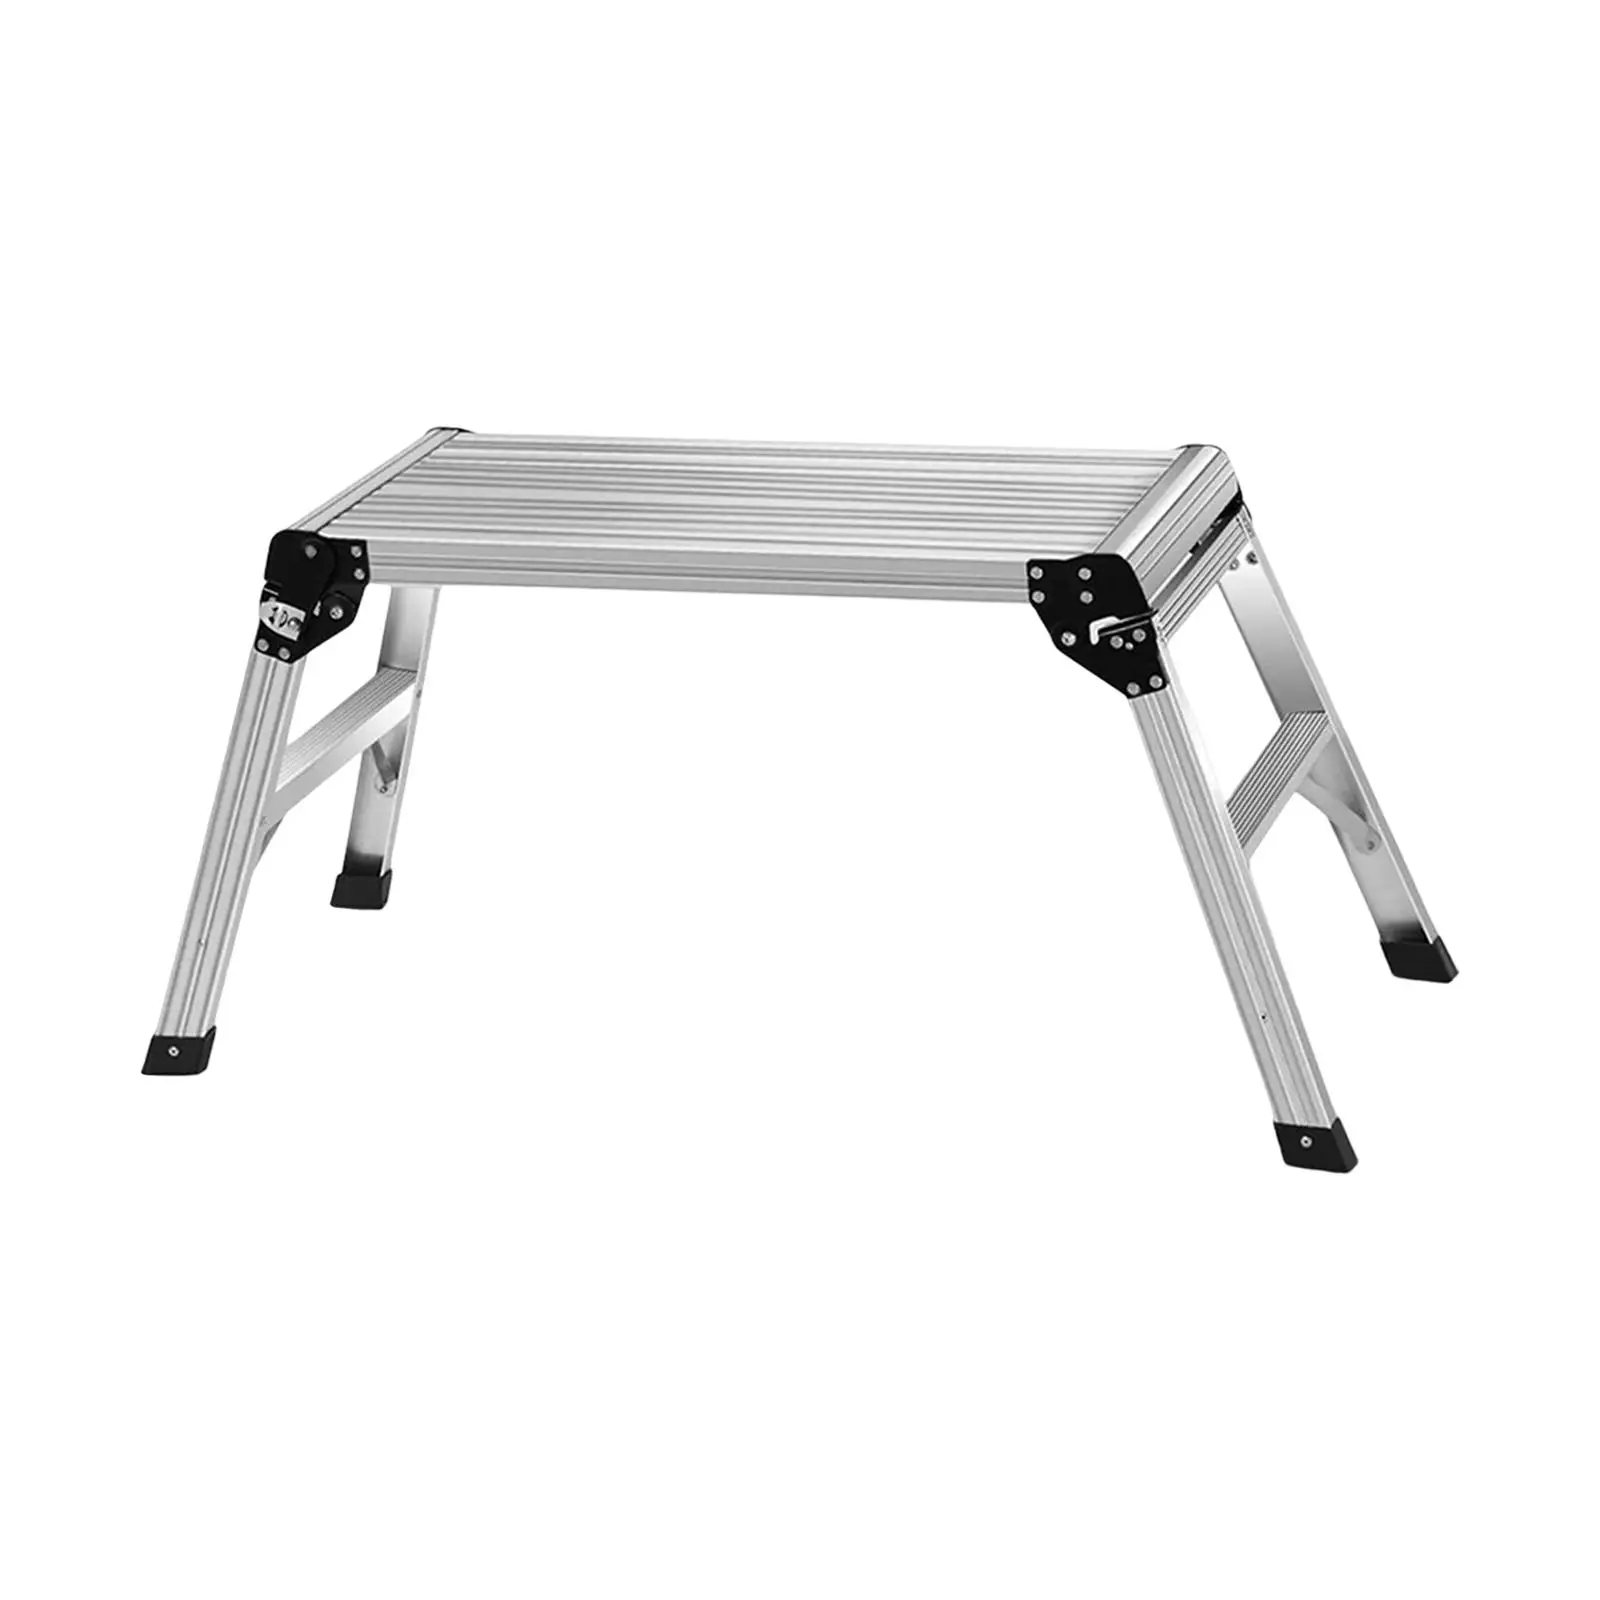 Folding Work Platform Footstool Car Wash Table Climbing Stool for Plasterers Repairing Cleaning Windows Home Decorating Office